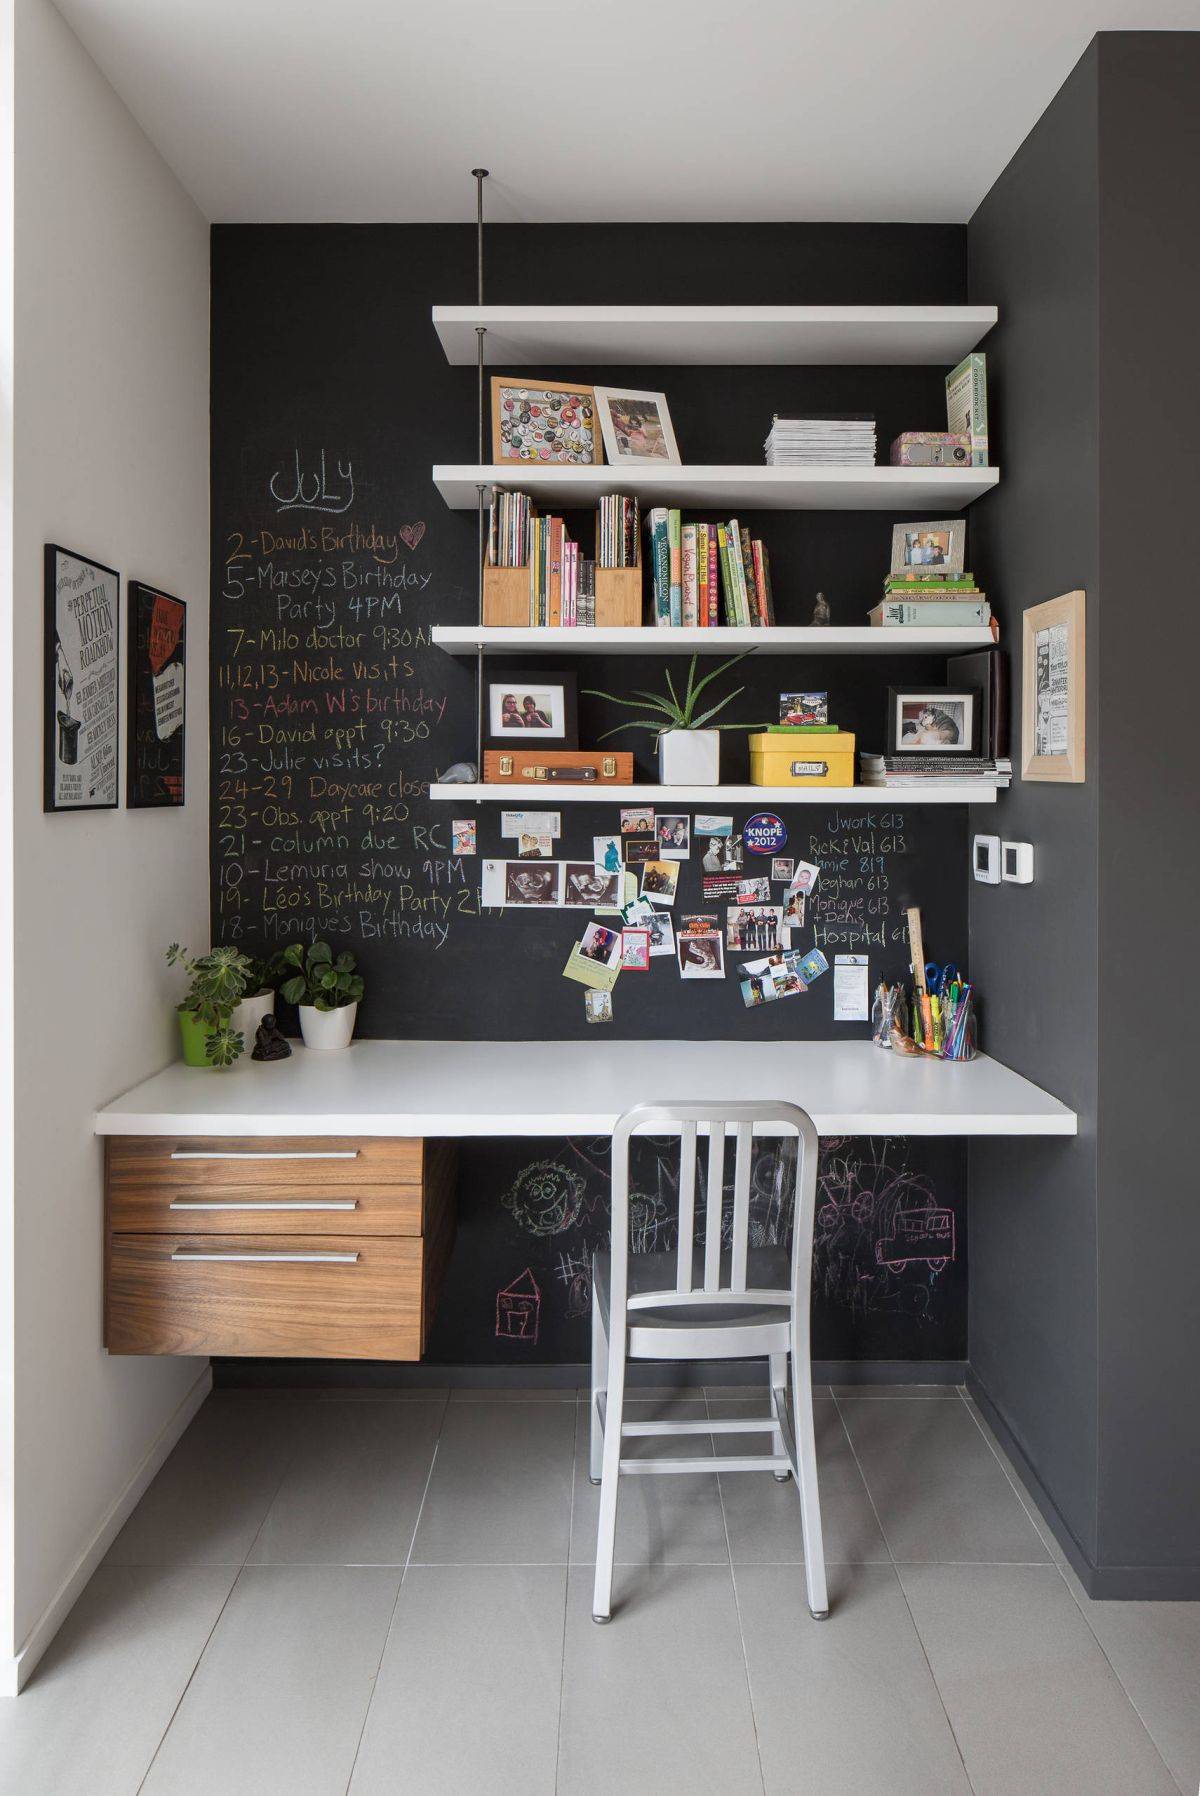 Chalkboard wall and an adaptable desk design with storage makes for a convenient home office